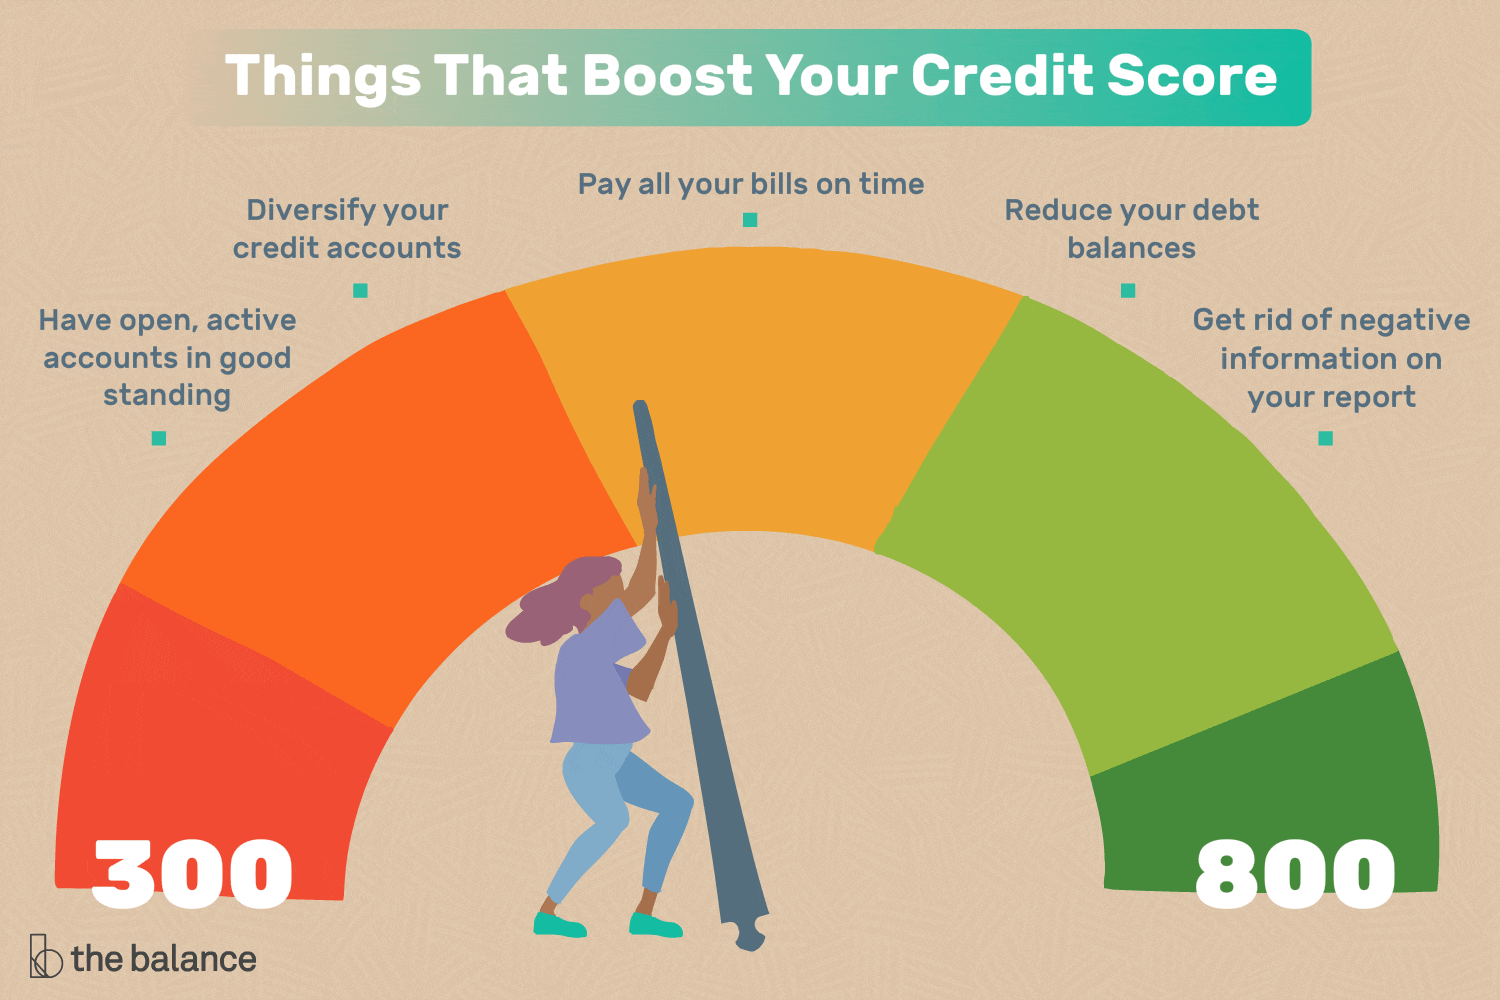 Boost Your Credit Score for Better Financial Freedom